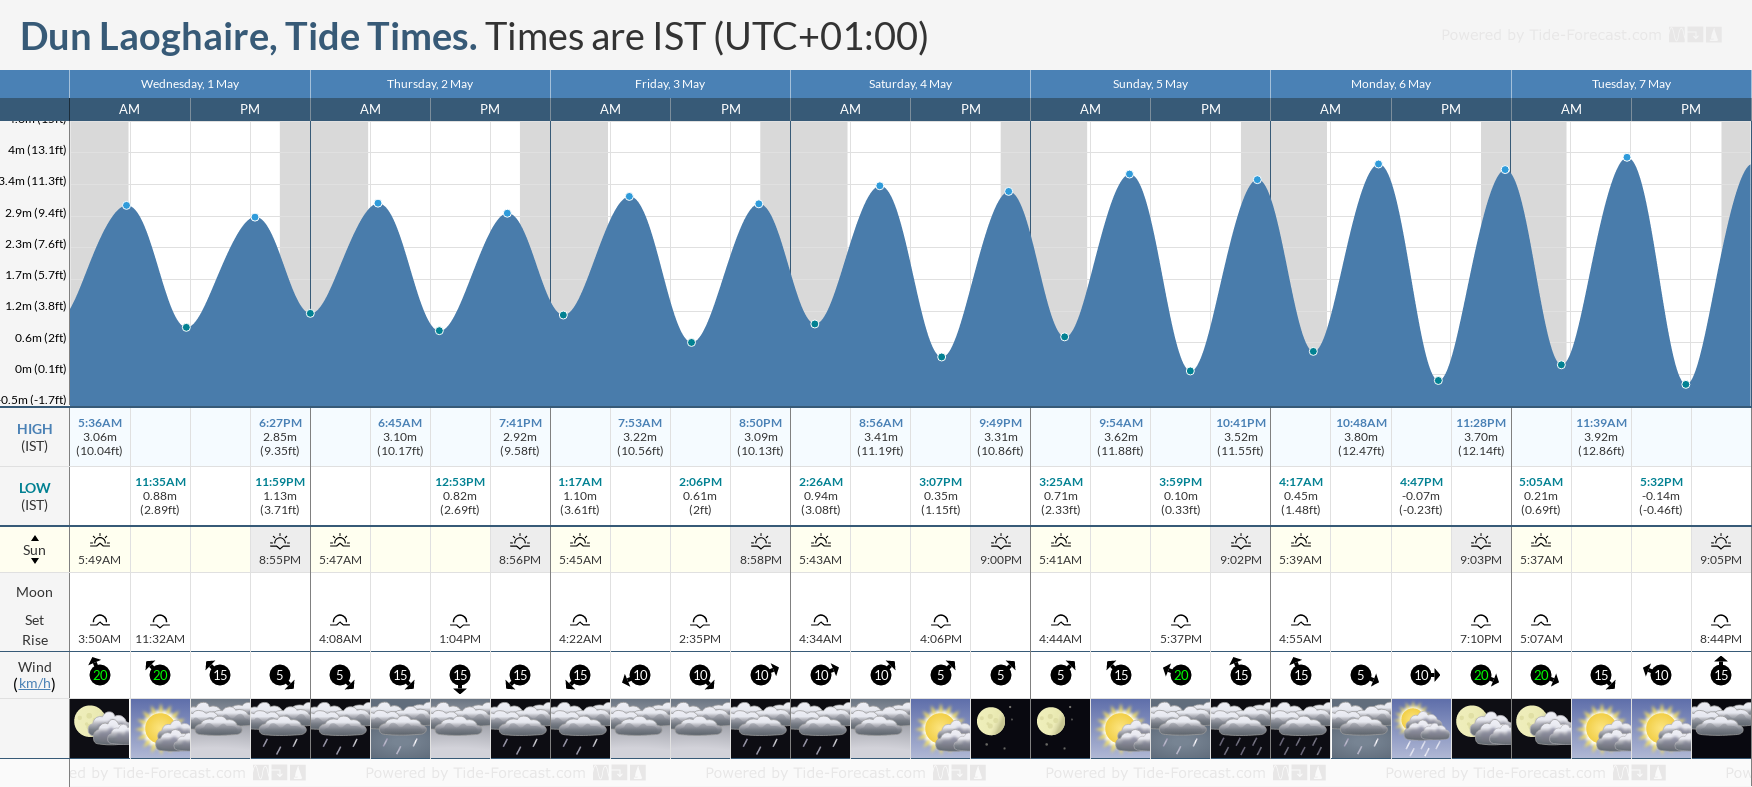 Dun Laoghaire Tide Chart including high and low tide tide times for the next 7 days